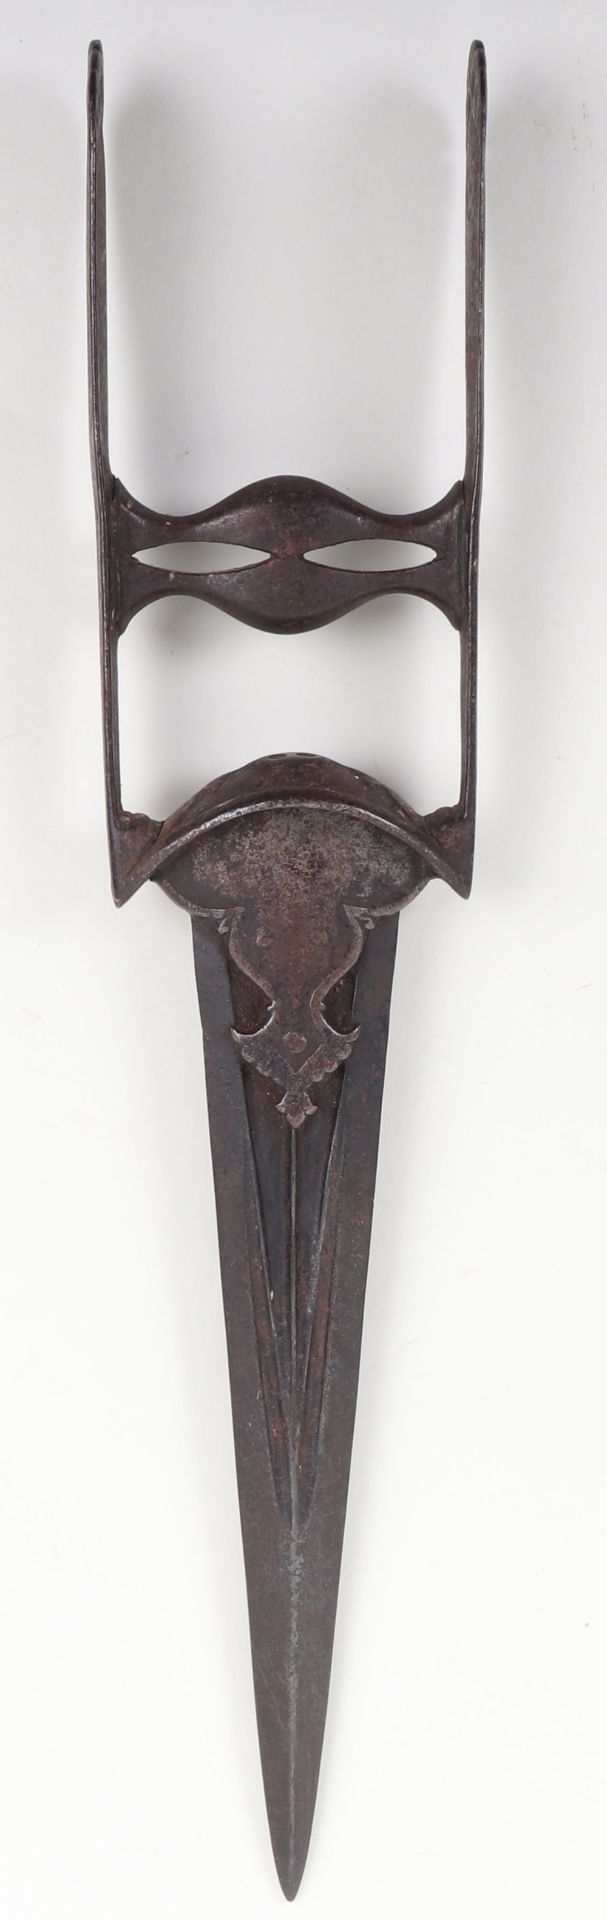 Indian Dagger Katar from the Tanjore Armoury, 17th Century - Image 2 of 12